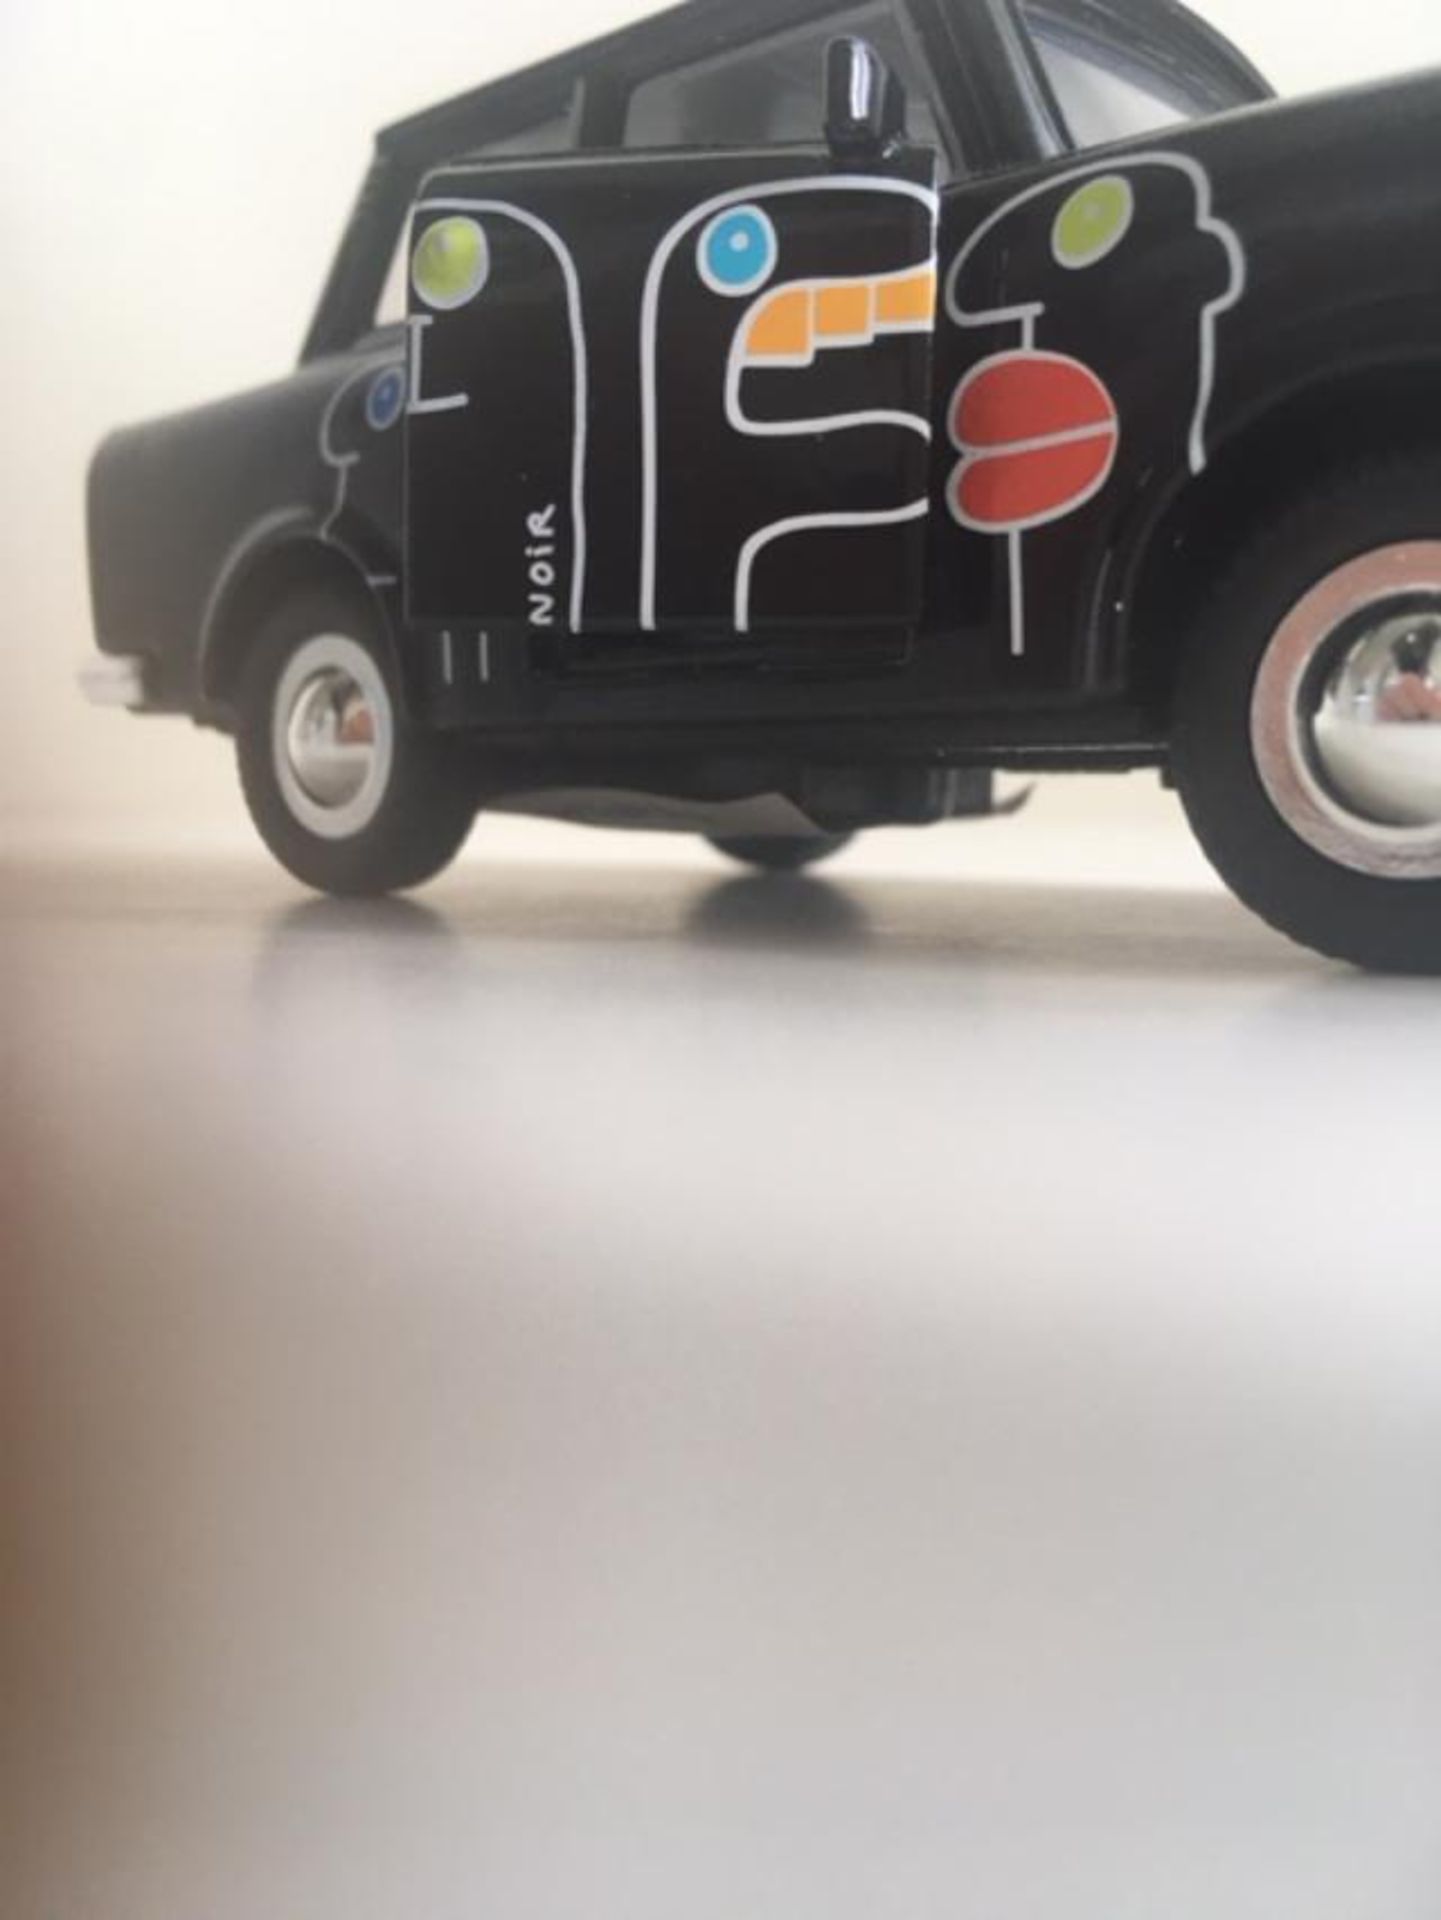 Thierry Noir (B.1958) Black ‘Heads’ Berlin Trabant Car In Colours By Thierry Noir, 1994, Sold Out - Image 11 of 21